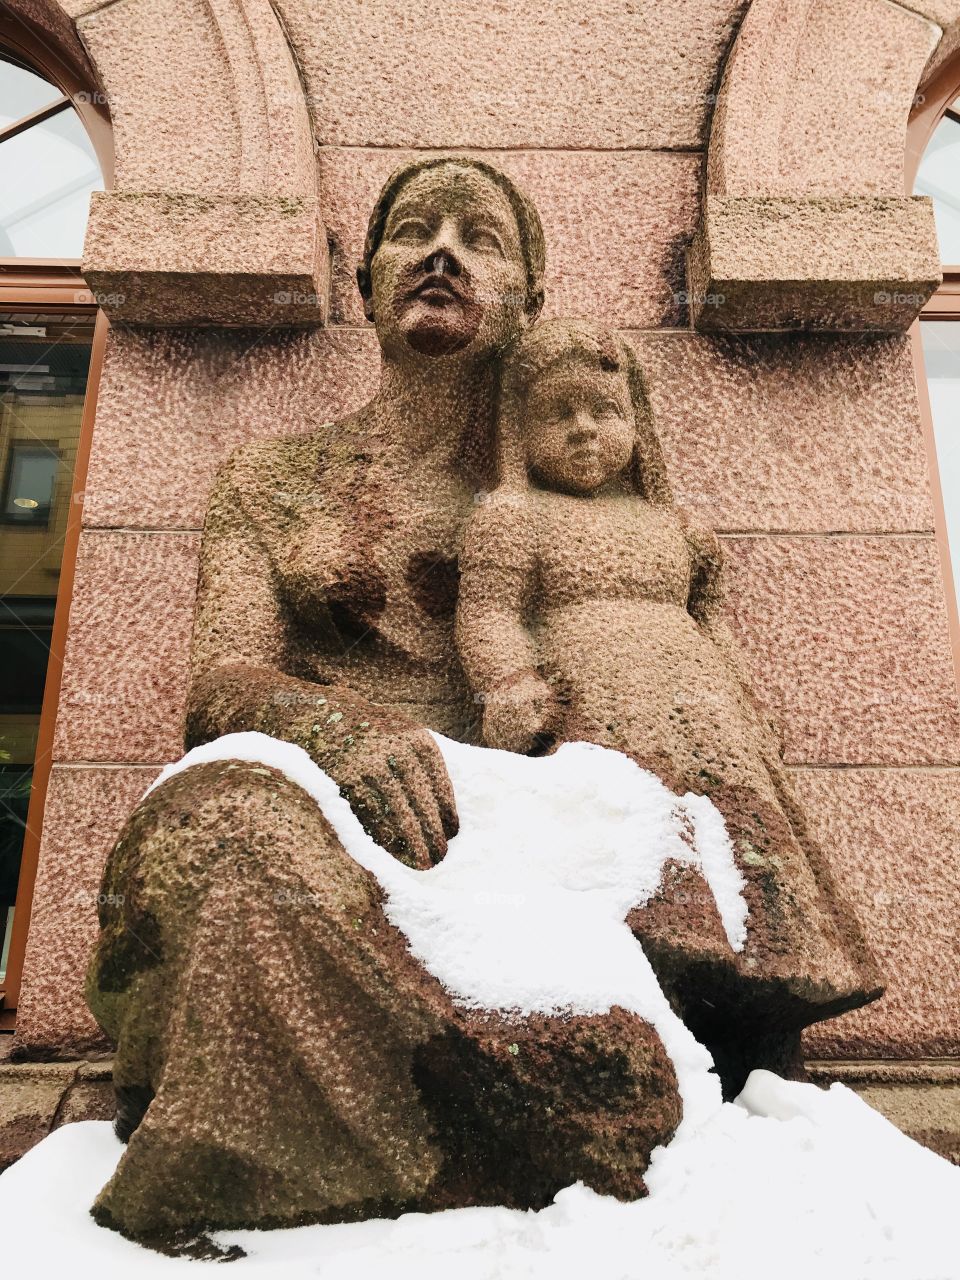 Wonderful sculptures of my mother and daughter on the facade of a house in Porvoo Porvoo,Suomi,Finland 🇫🇮